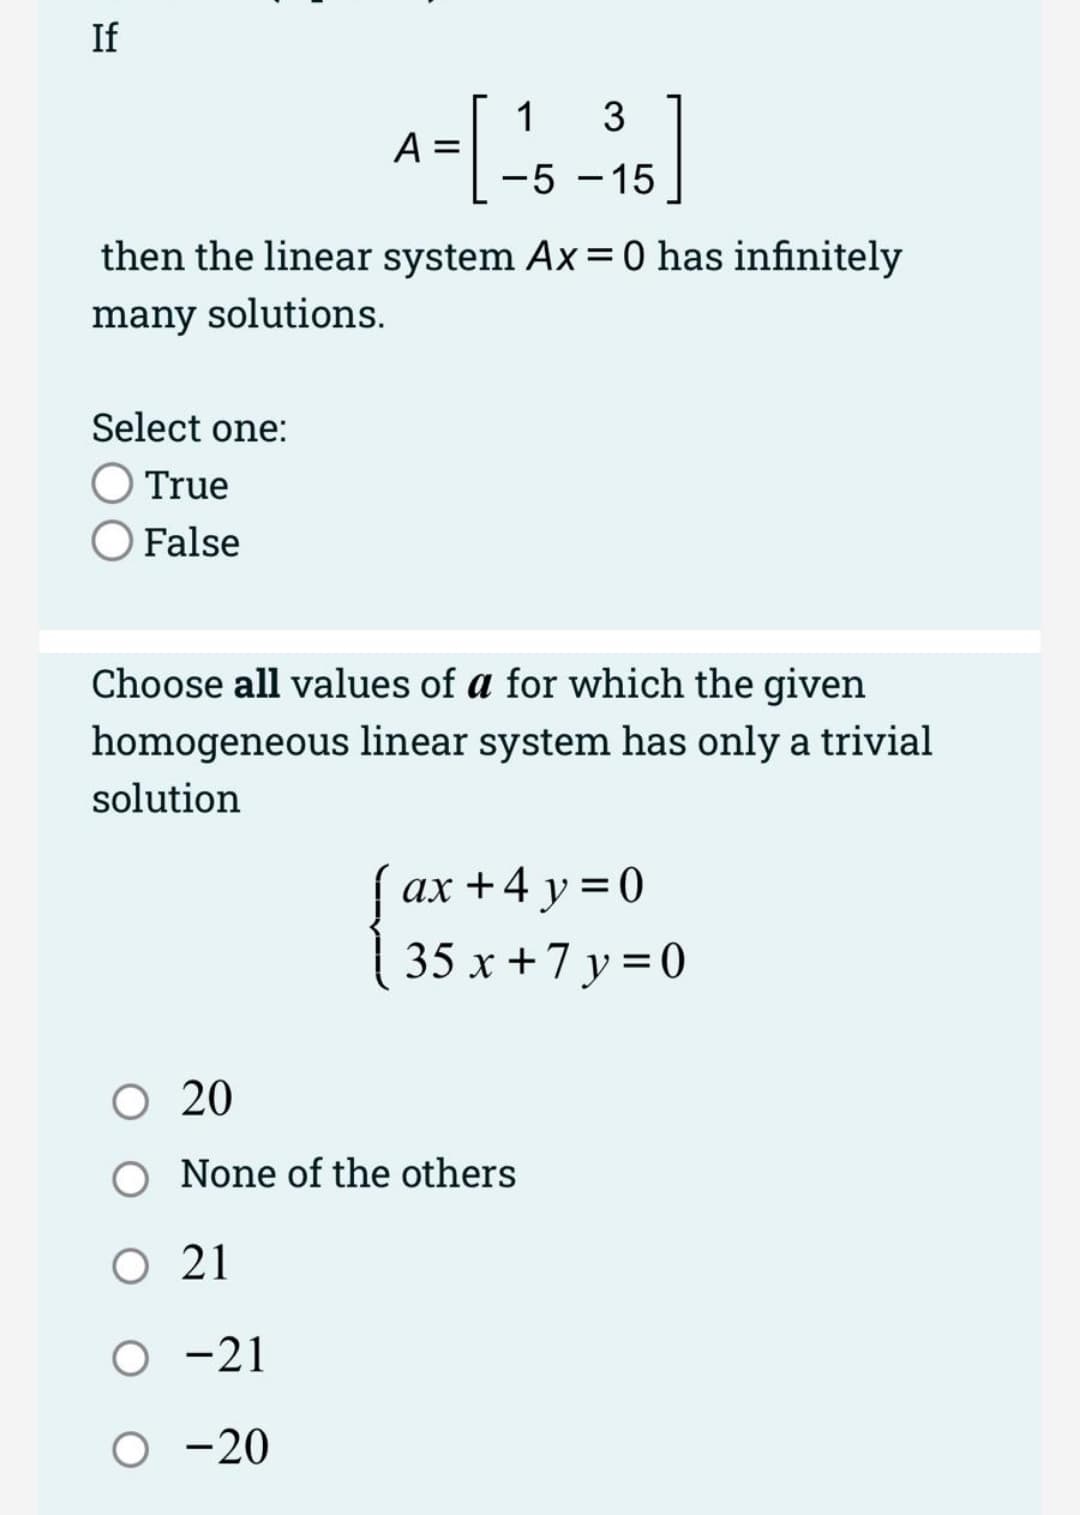 If
then the linear system Ax = 0 has infinitely
many solutions.
Select one:
True
O False
3
A = [-15-15]
Choose all values of a for which the given
homogeneous linear system has only a trivial
solution
O 20
O 21
O -21
O -20
ax+4y=0
35x+7y=0
None of the others